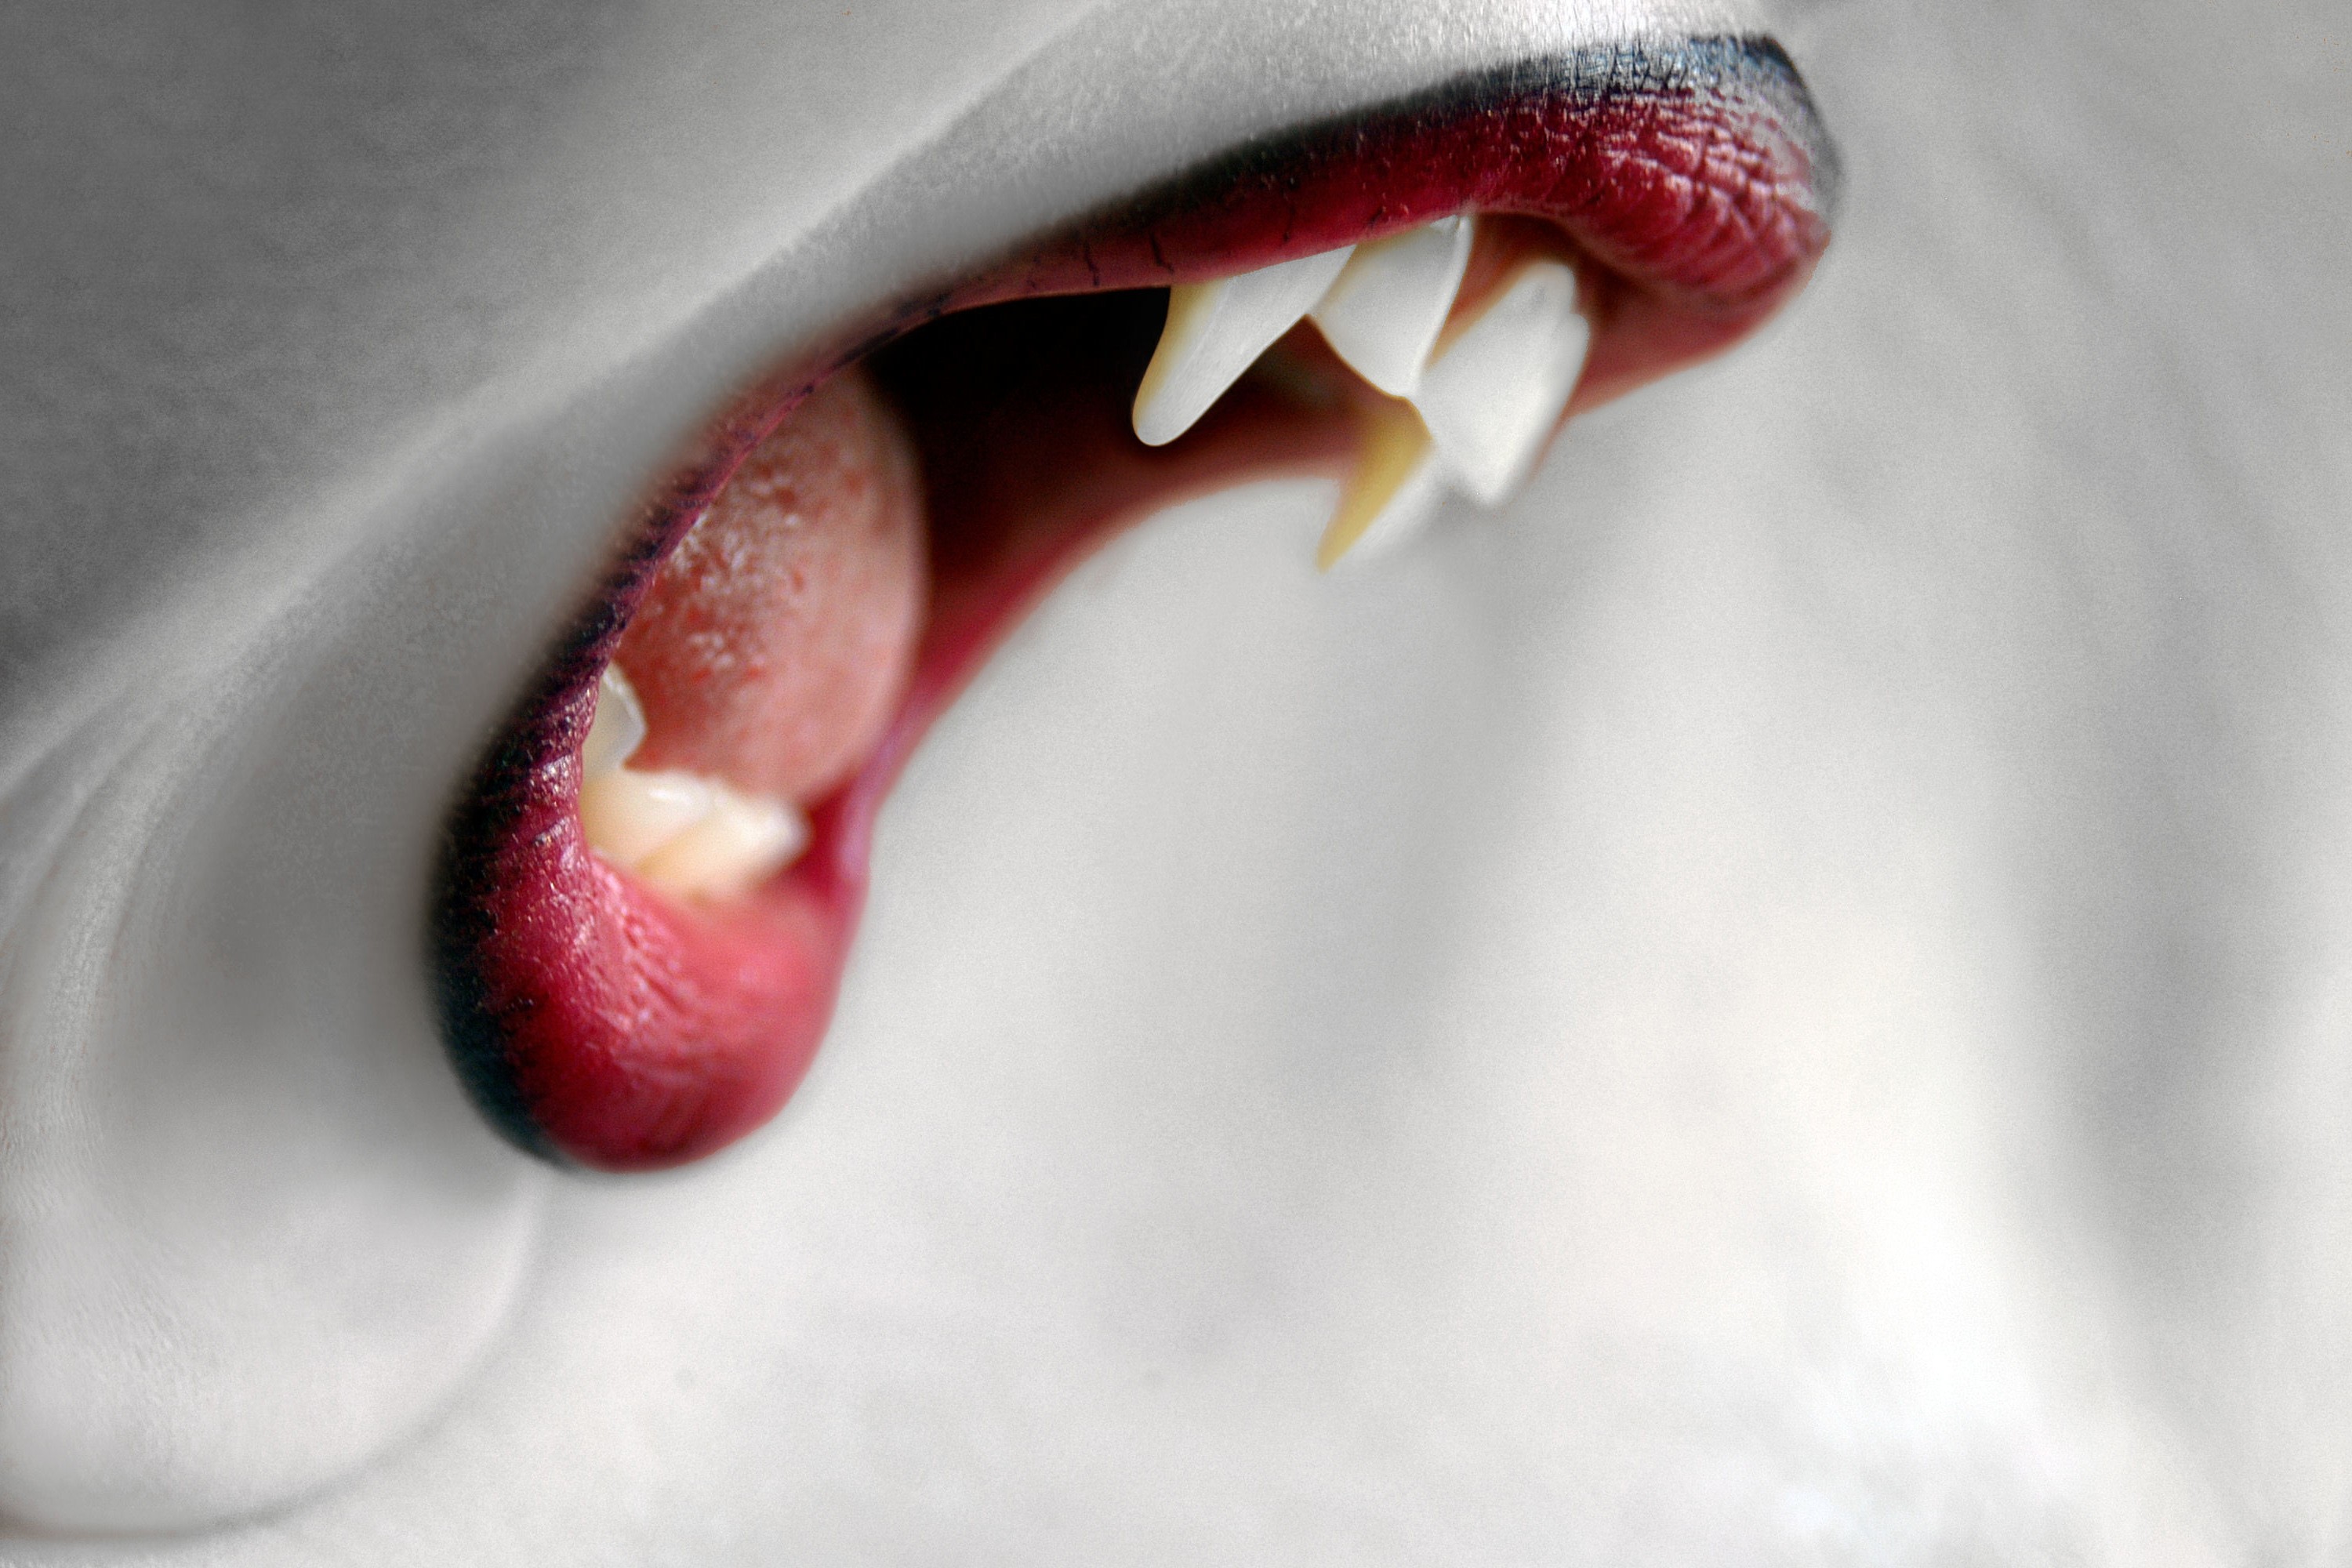 Vampire Wallpapers For Android - Vampire Teeth Side View - HD Wallpaper 